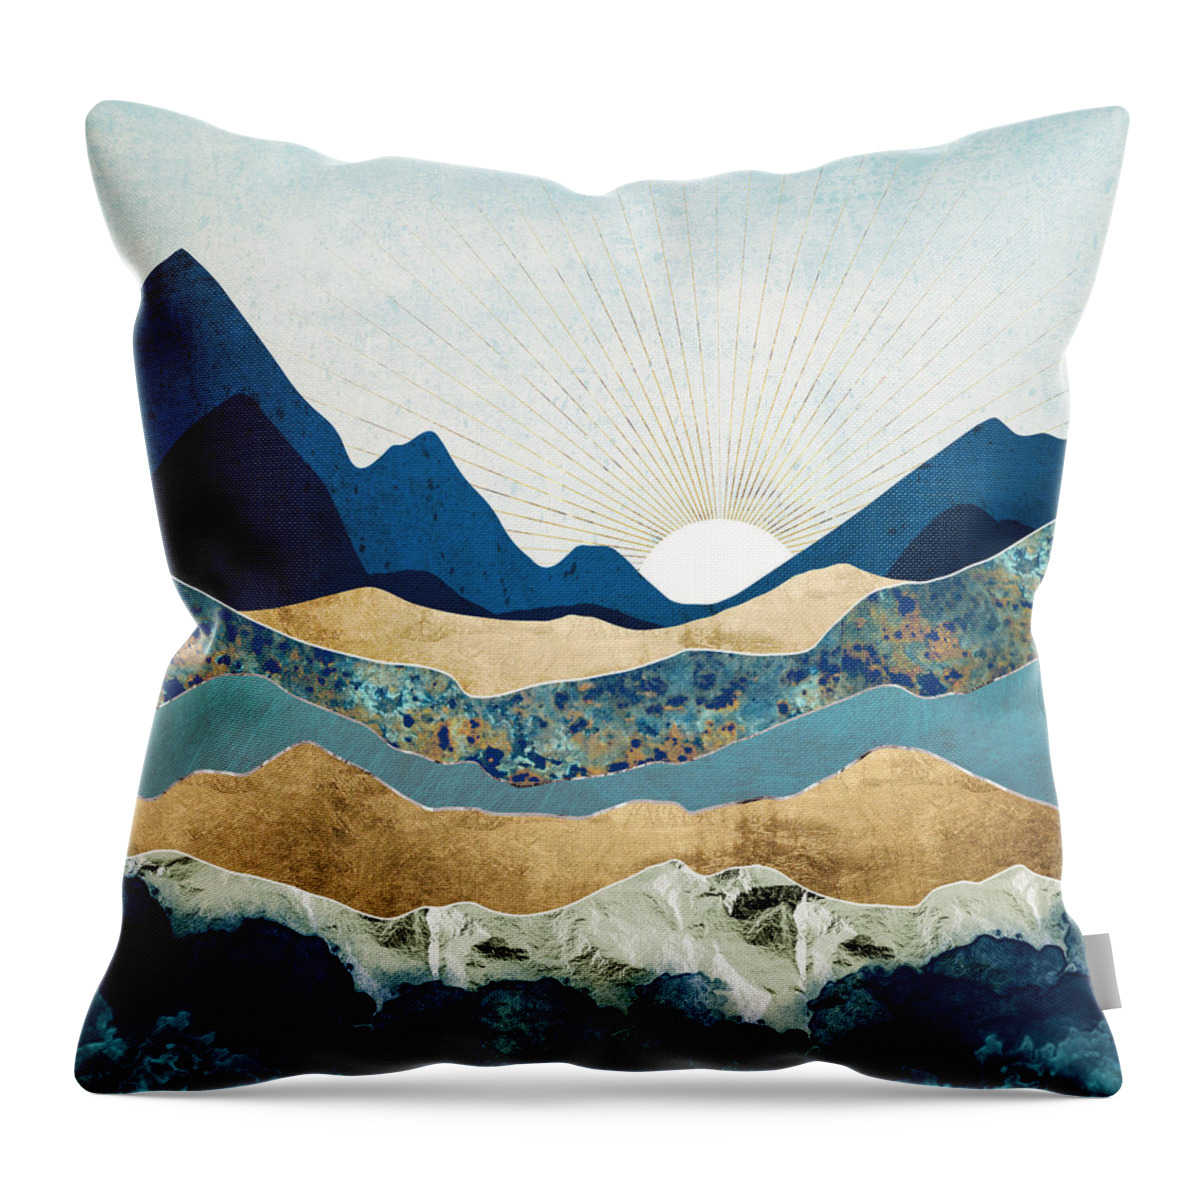 Mountains Throw Pillow featuring the digital art Next Journey by Spacefrog Designs